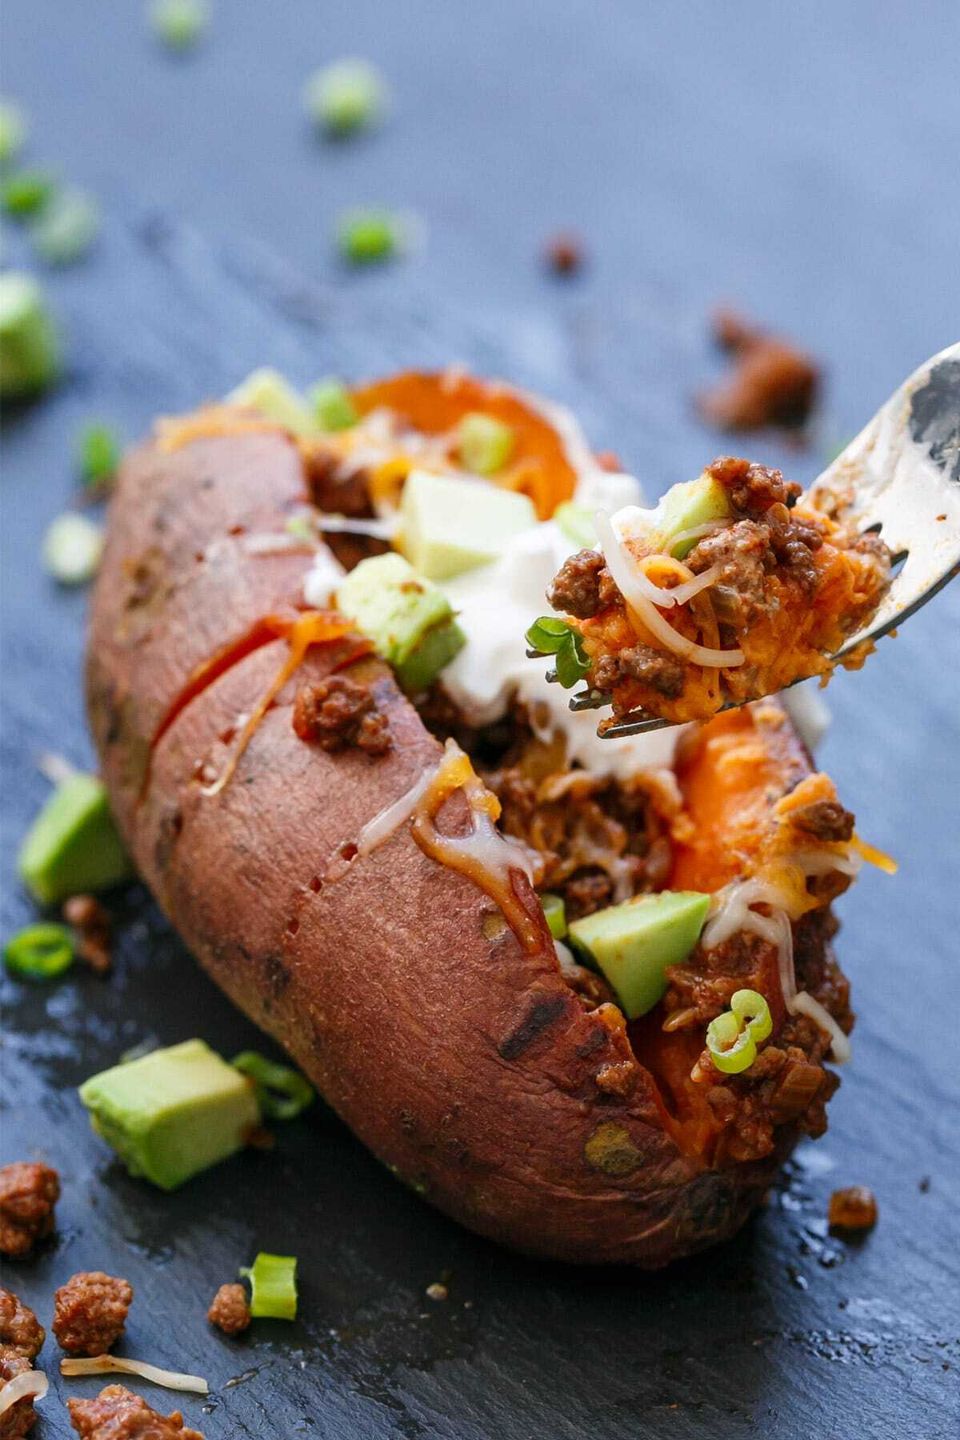 Loaded And Stuffed: The Best Baked Sweet Potato Recipes | HuffPost Life